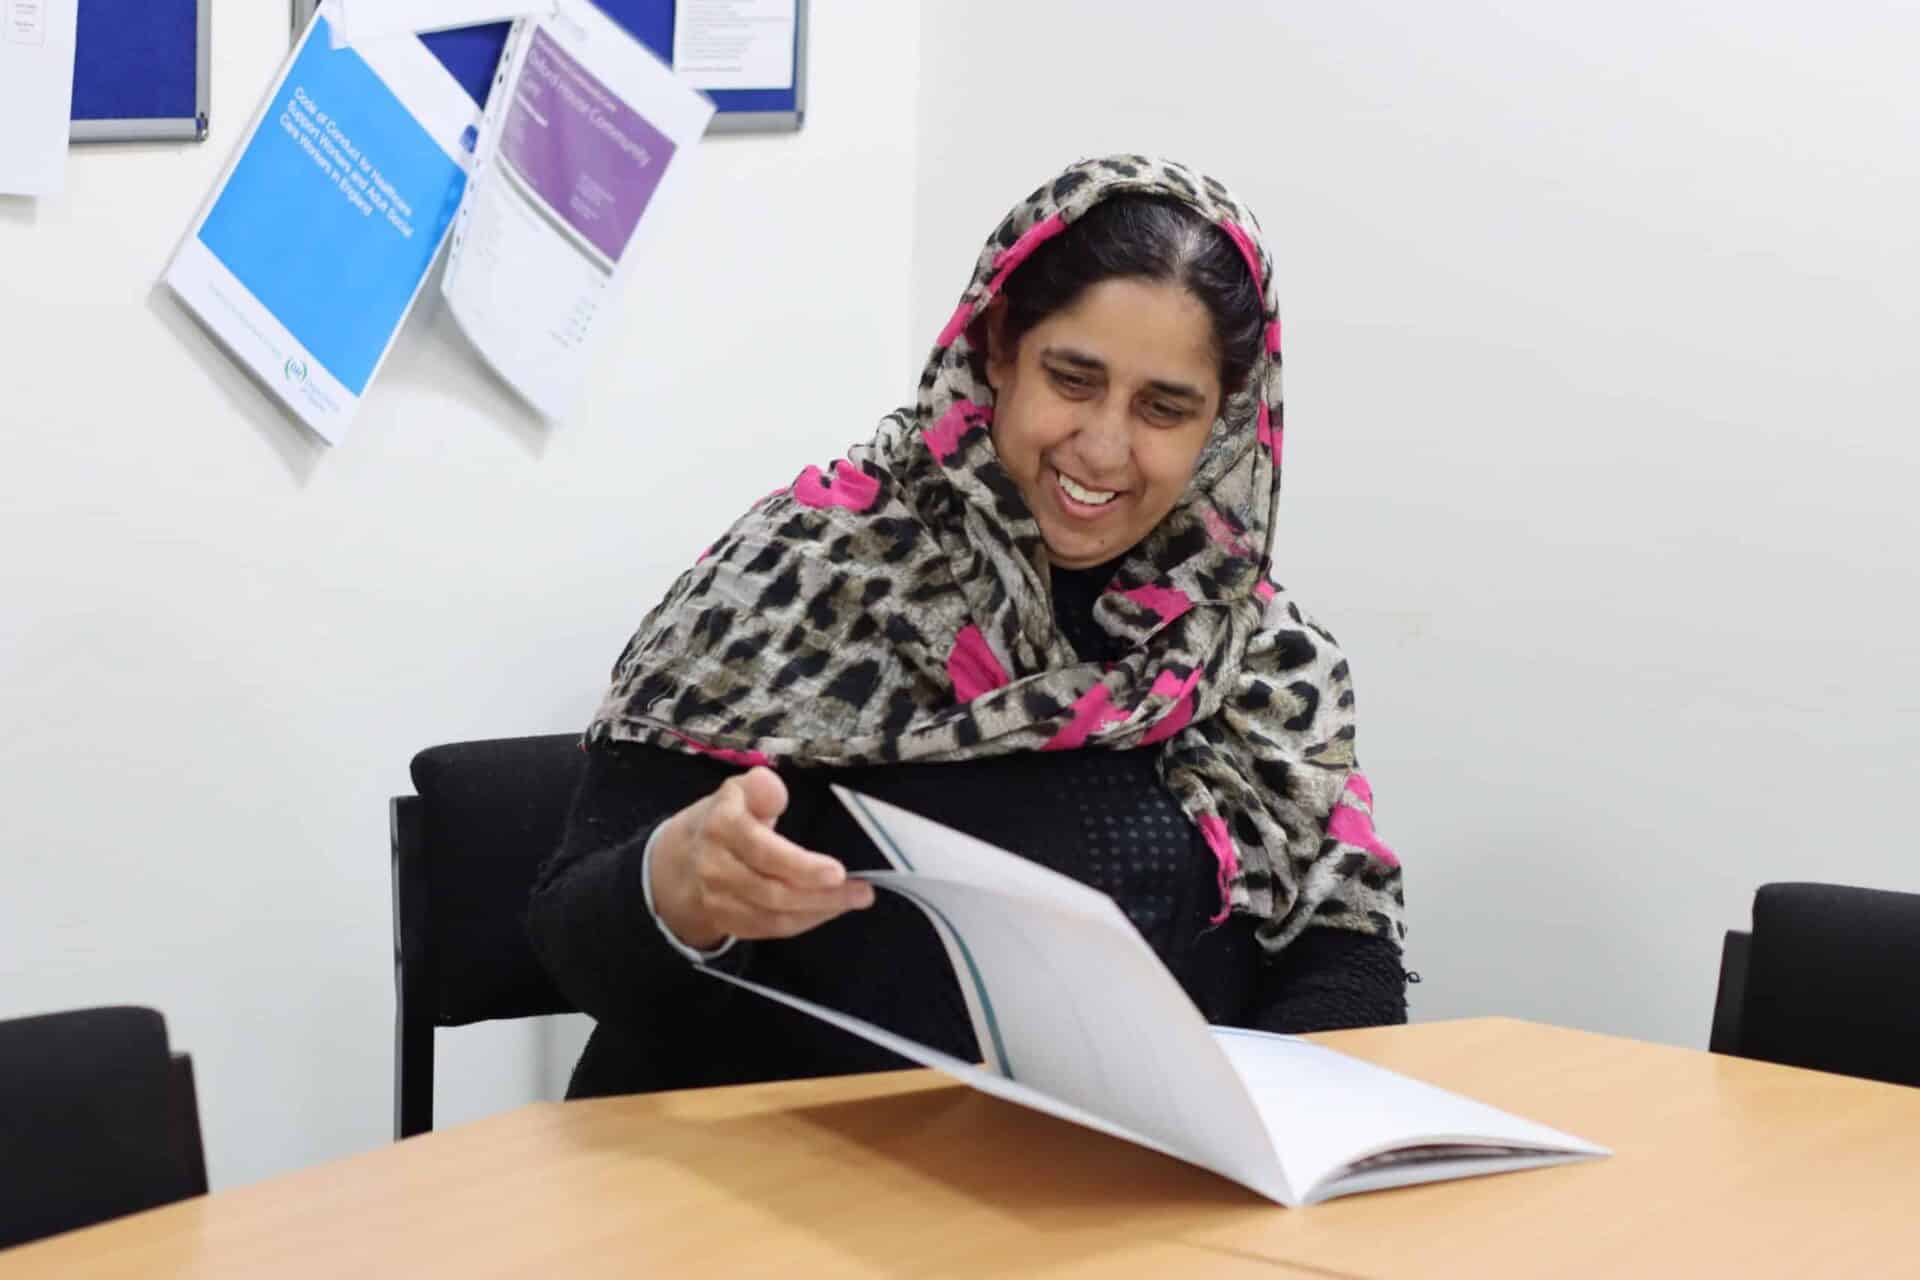 A smiling woman in a patterned headscarf, engaged in reading a report at a conference table.